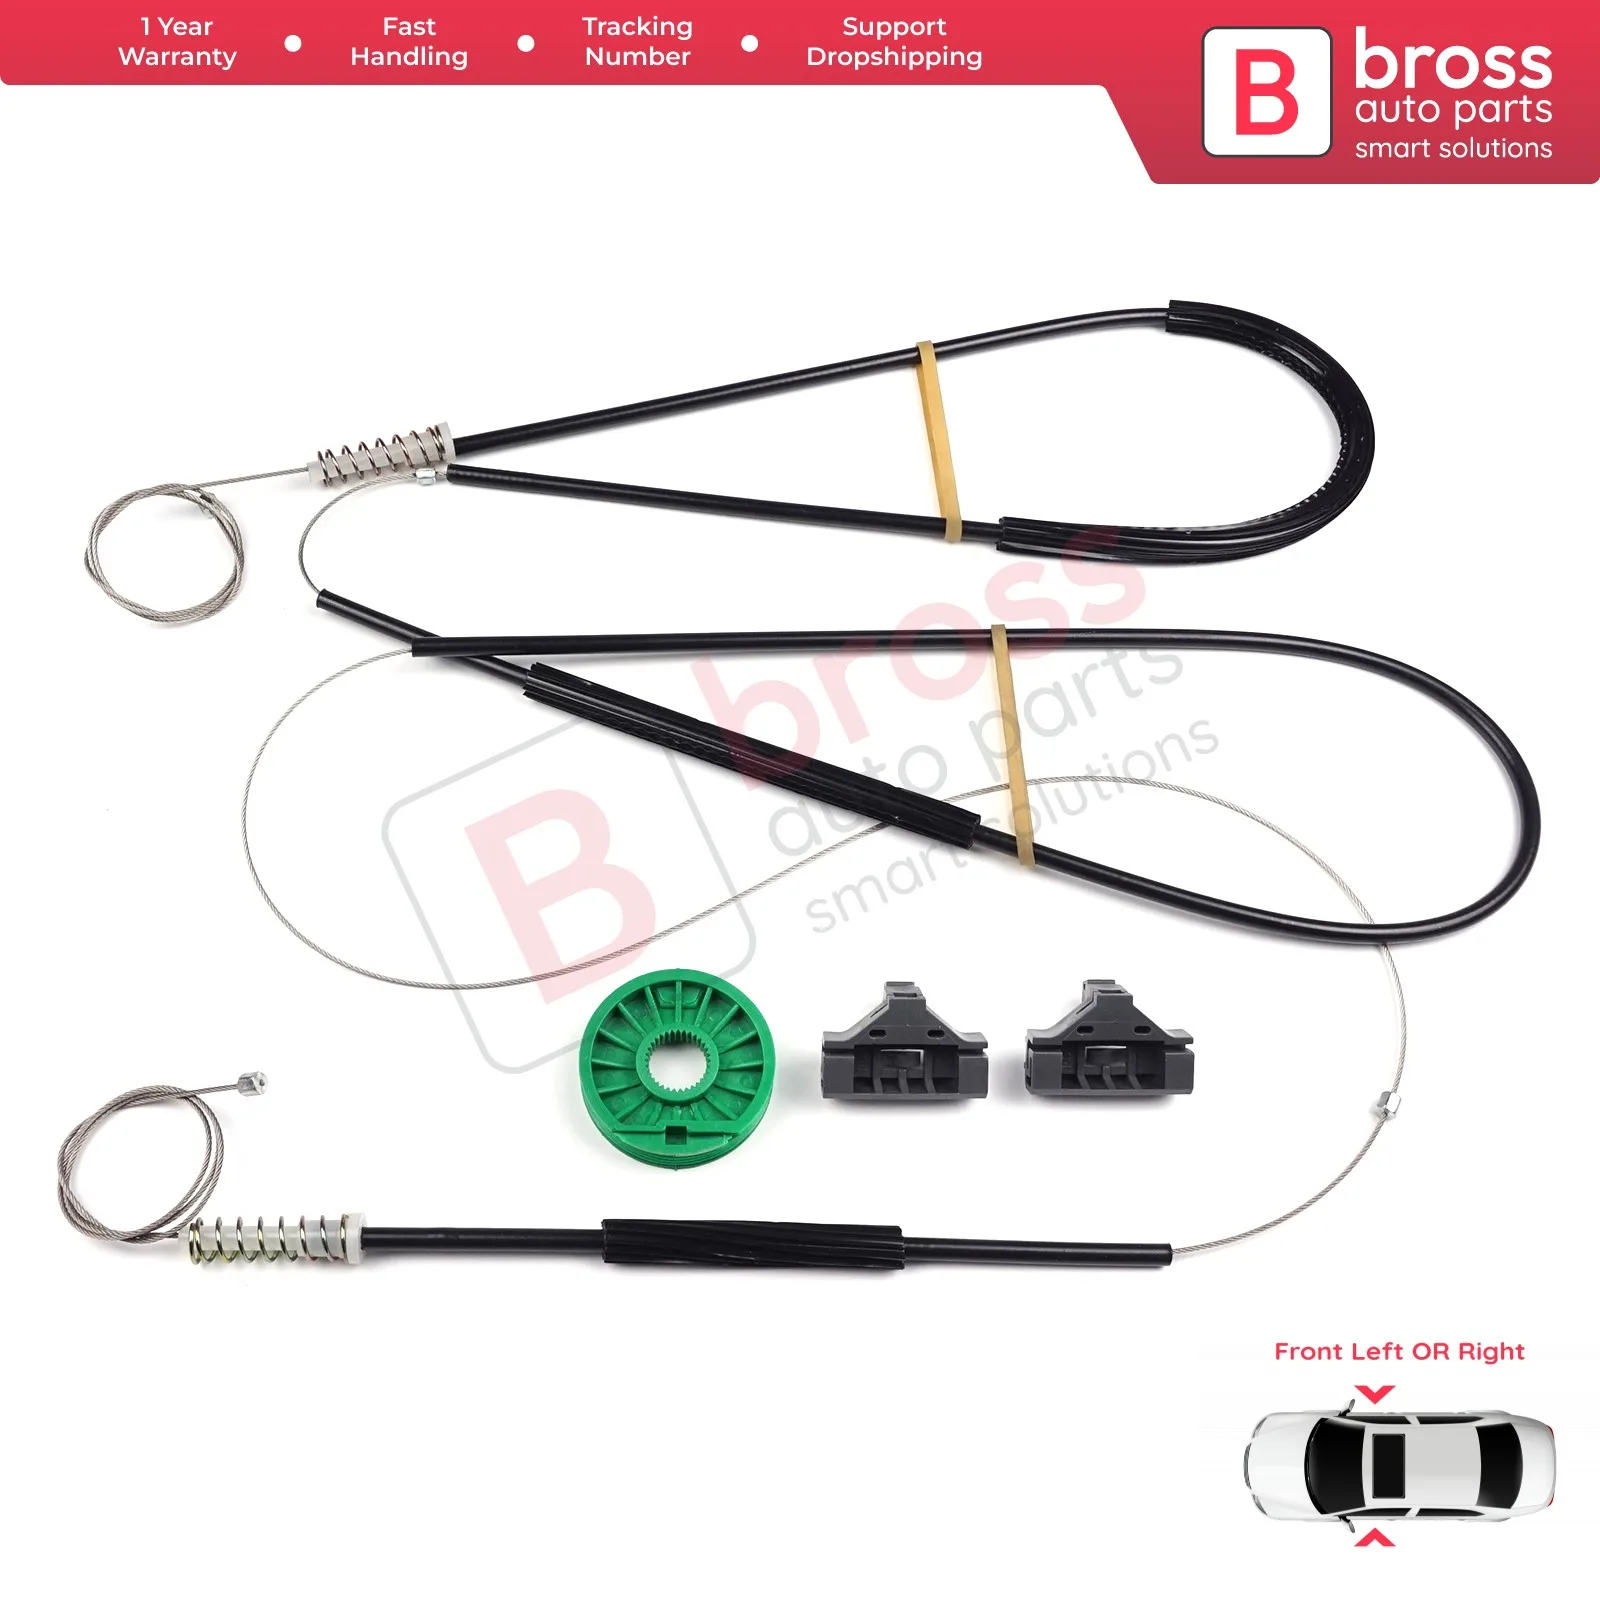 

Bross Auto Parts BWR556 Electrical Power Window Regulator Repair Kit Front Left or Right Door for Seat Ibiza Coupe 1999-2002